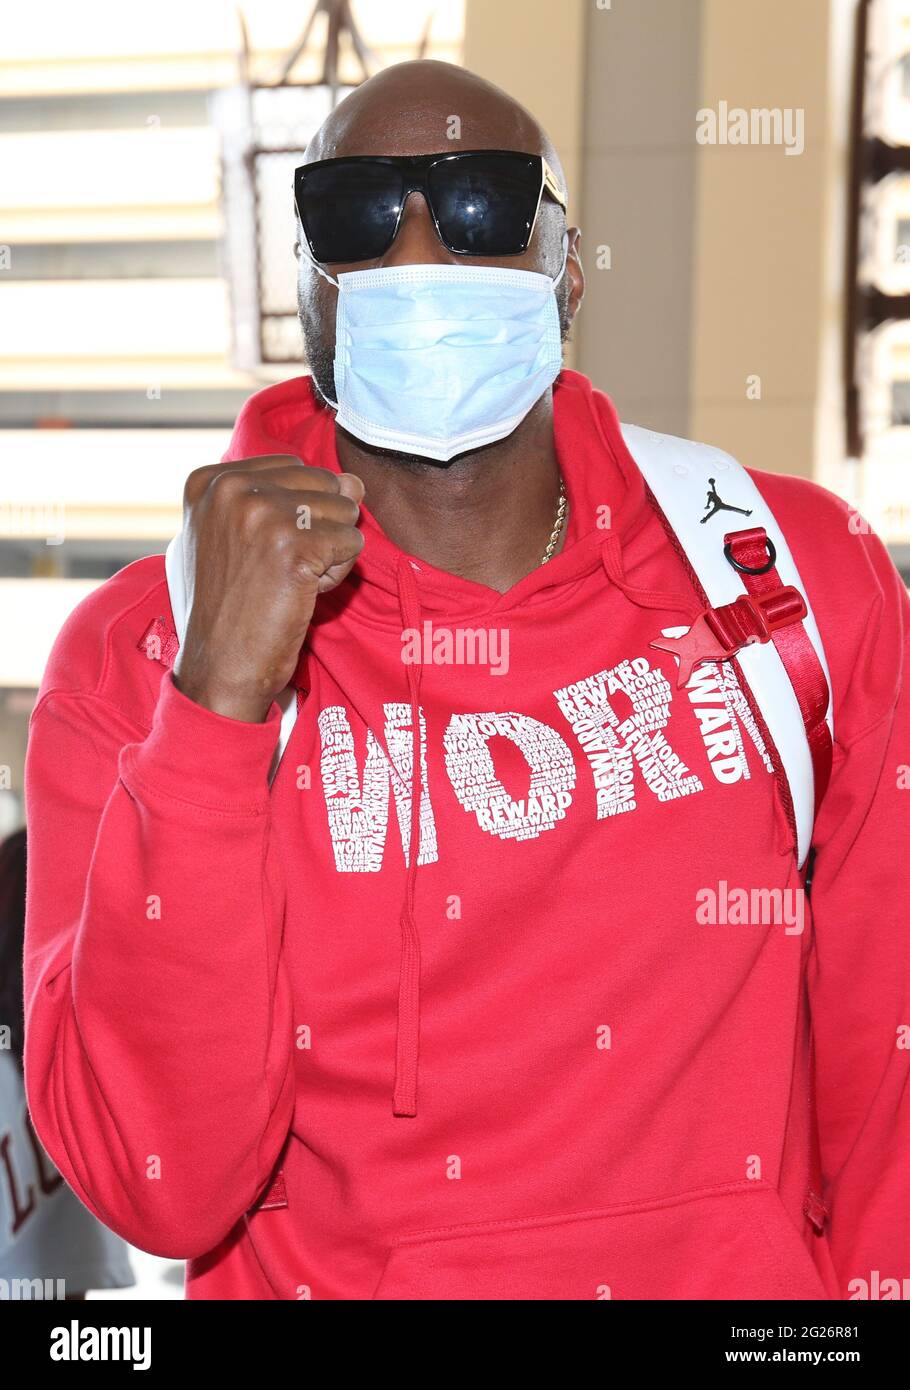 Atlantic City, NJ, USA. 8th June, 2021. Lamar Odom pictured arriving to the  Showboat hotel in Atlantic City New Jersey on June 8, 2021 for celebrity  boxing fight week. Lamar Odom will